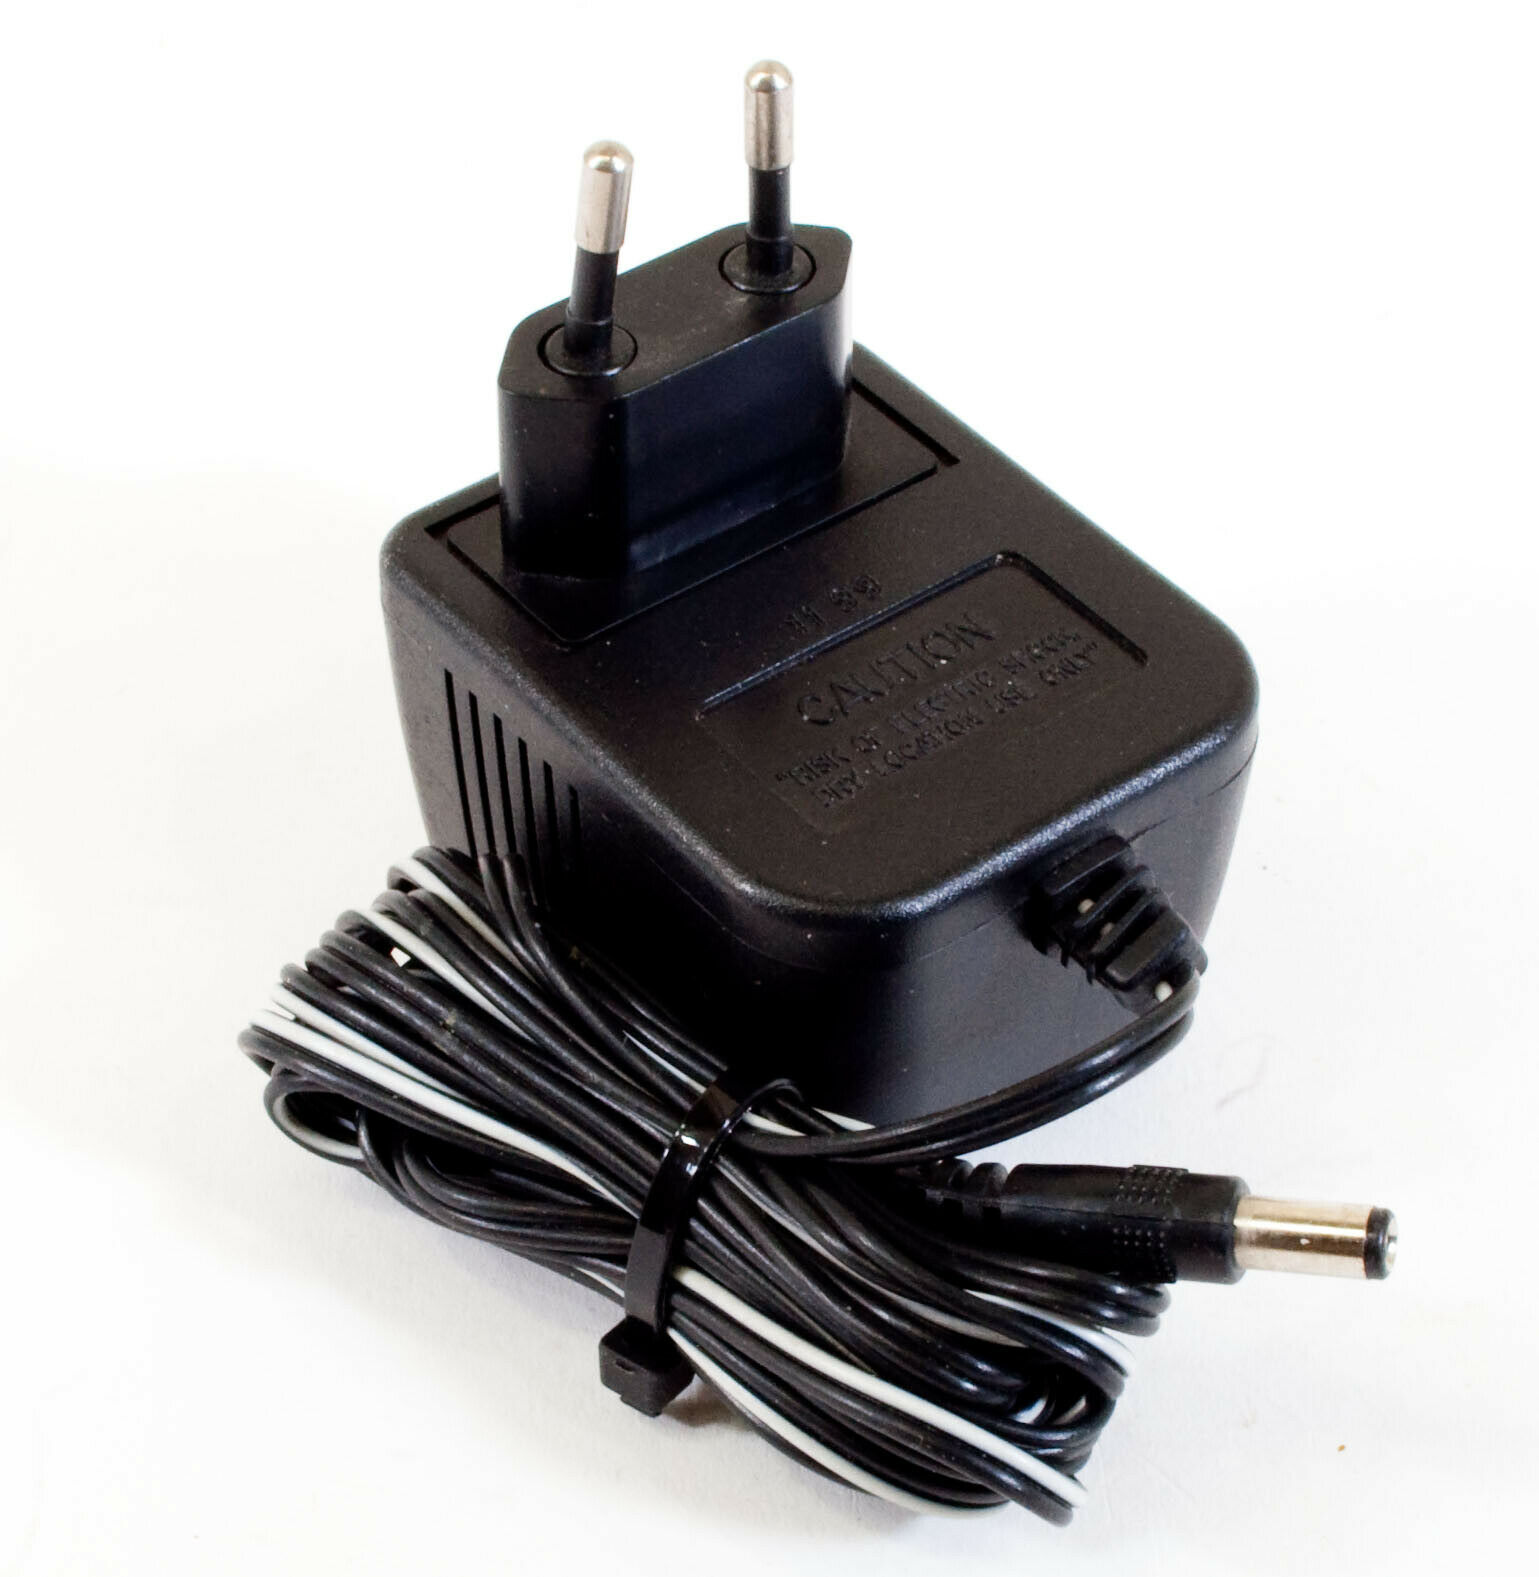 Echowell SCP41-90500 AC Adapter 9V 500mA Original Power Supply Europlug Output Current: 500 mA Voltage: 9 V MPN: SCP4